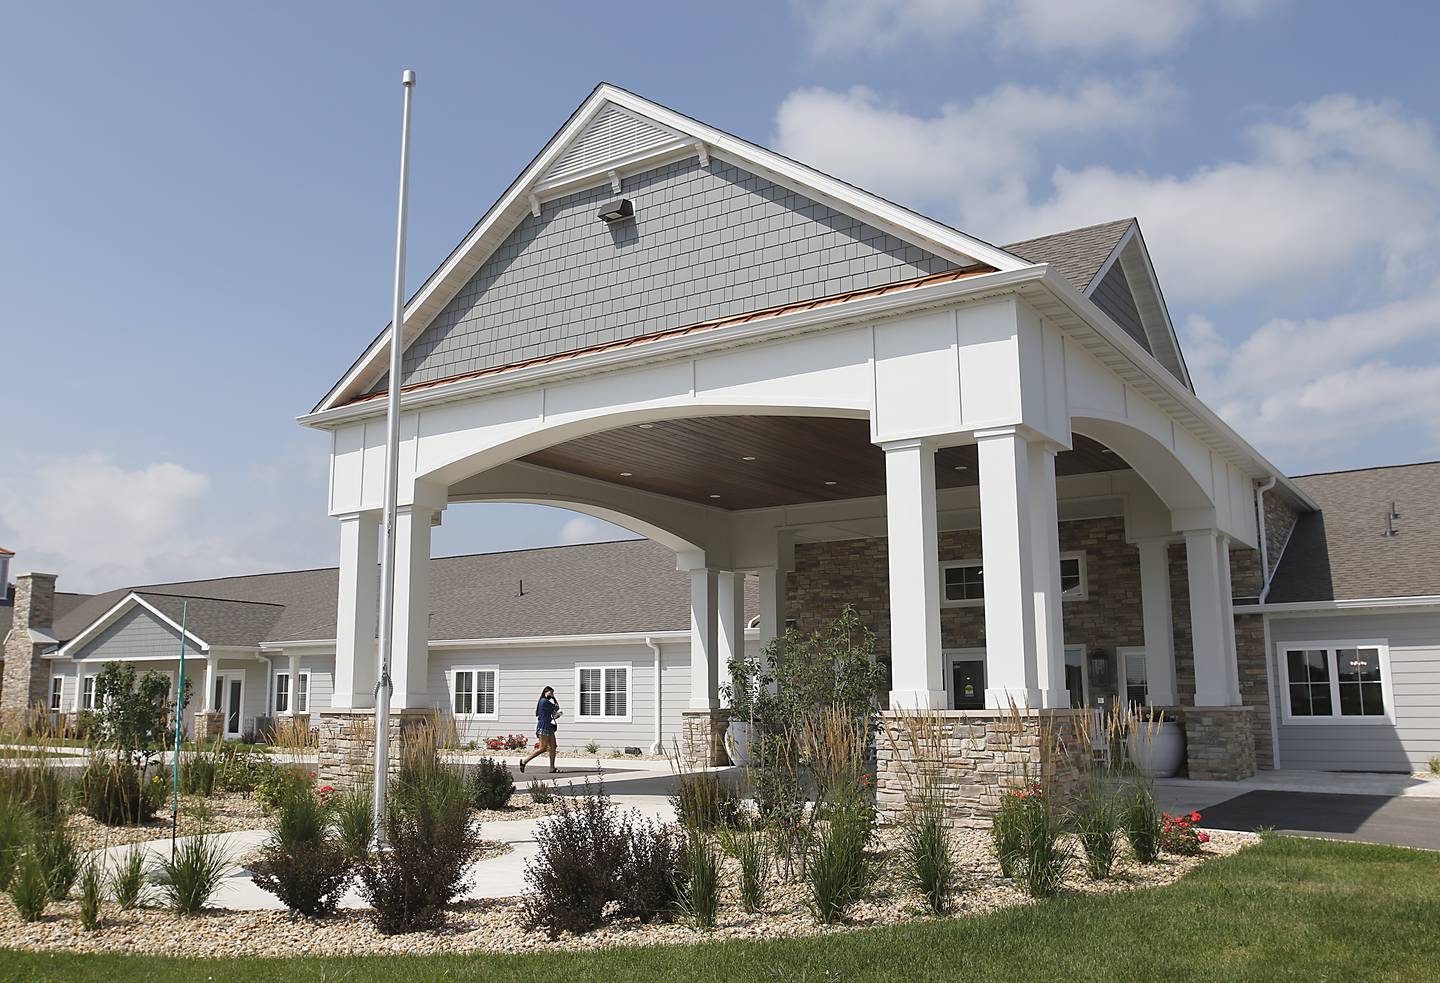 A person walks into the new Cedarhurst assisted living center on Thursday, Aug. 4, 2022. The center at 10511 Route 14, in Woodstock, is scheduled to opening later this month.